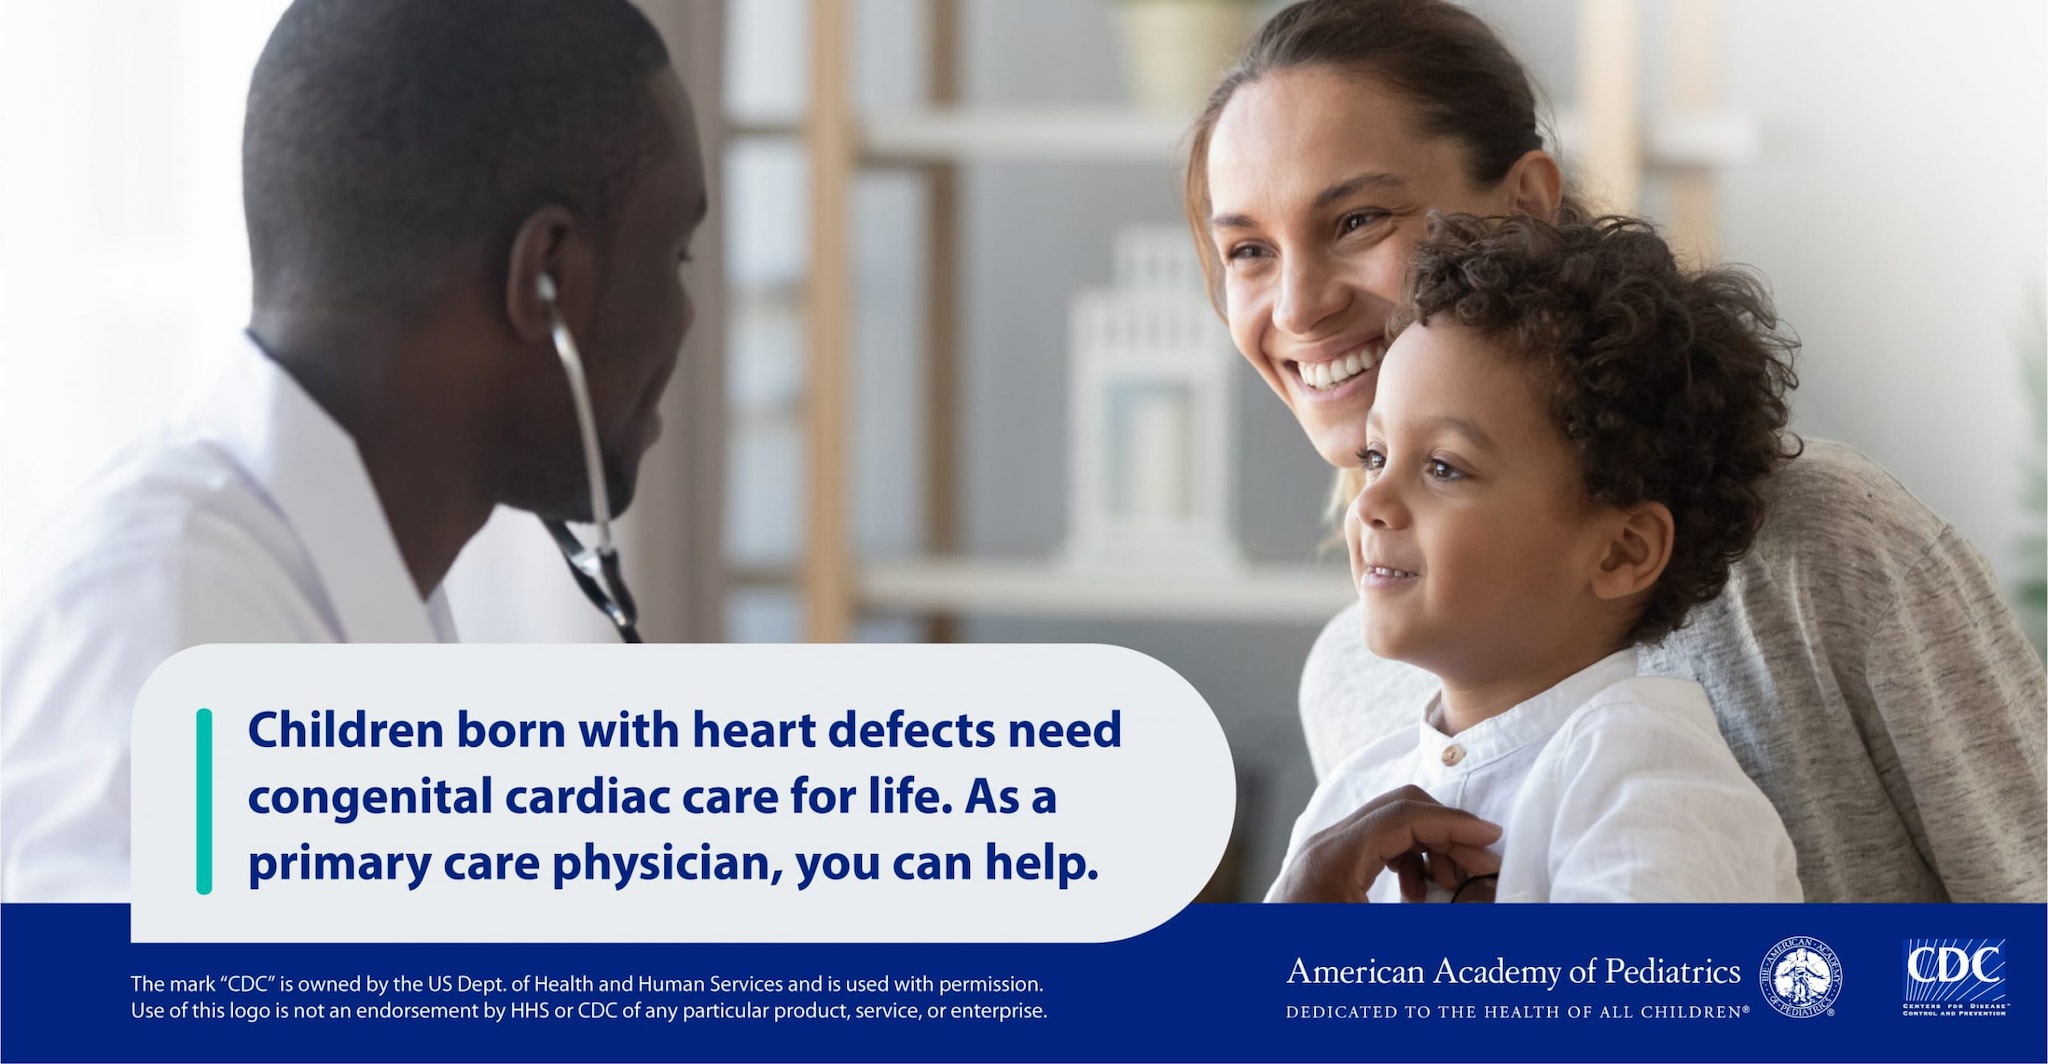 The background shows a parent and child talking with a doctor and the foreground includes this text "Children born with heart defects need congenital cardiac care for life. As a primary care physician, you can help."